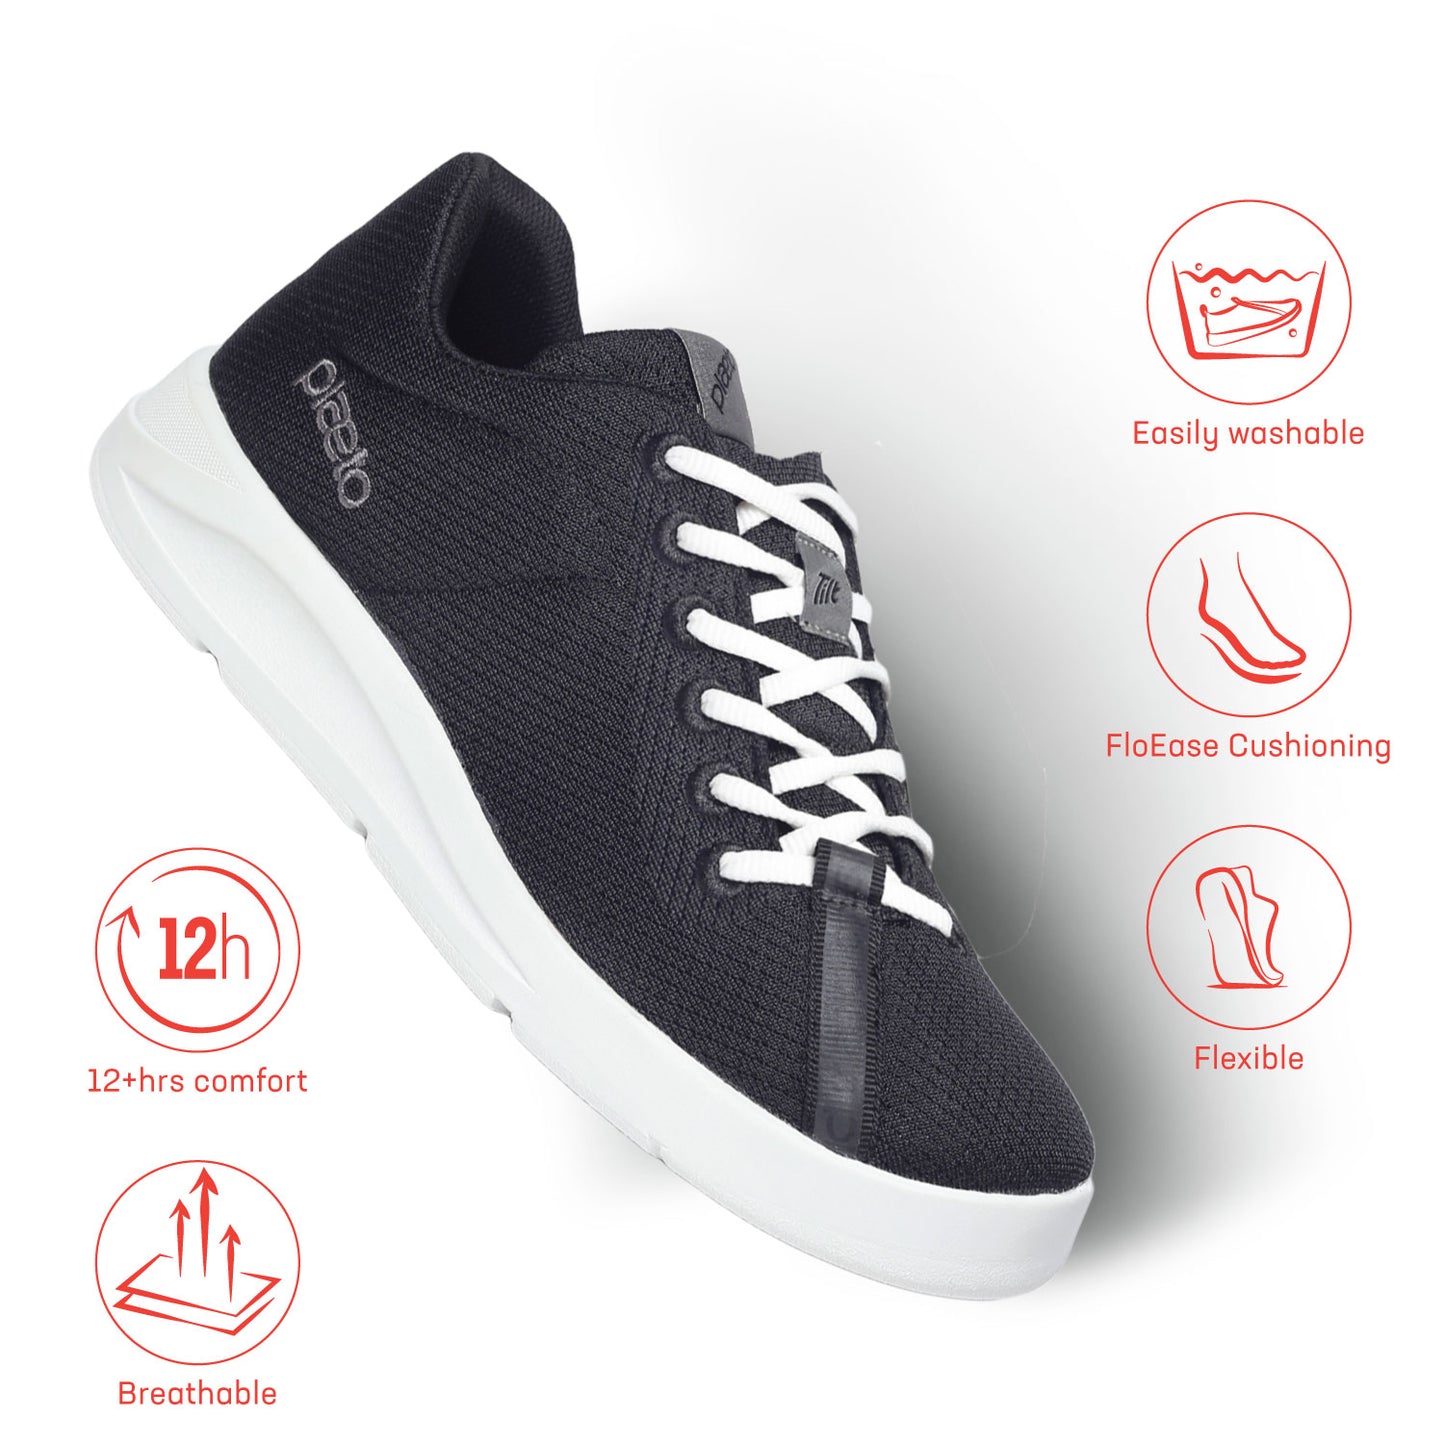 Casual Everyday Air Mesh Sneakers for Men - Ace Black